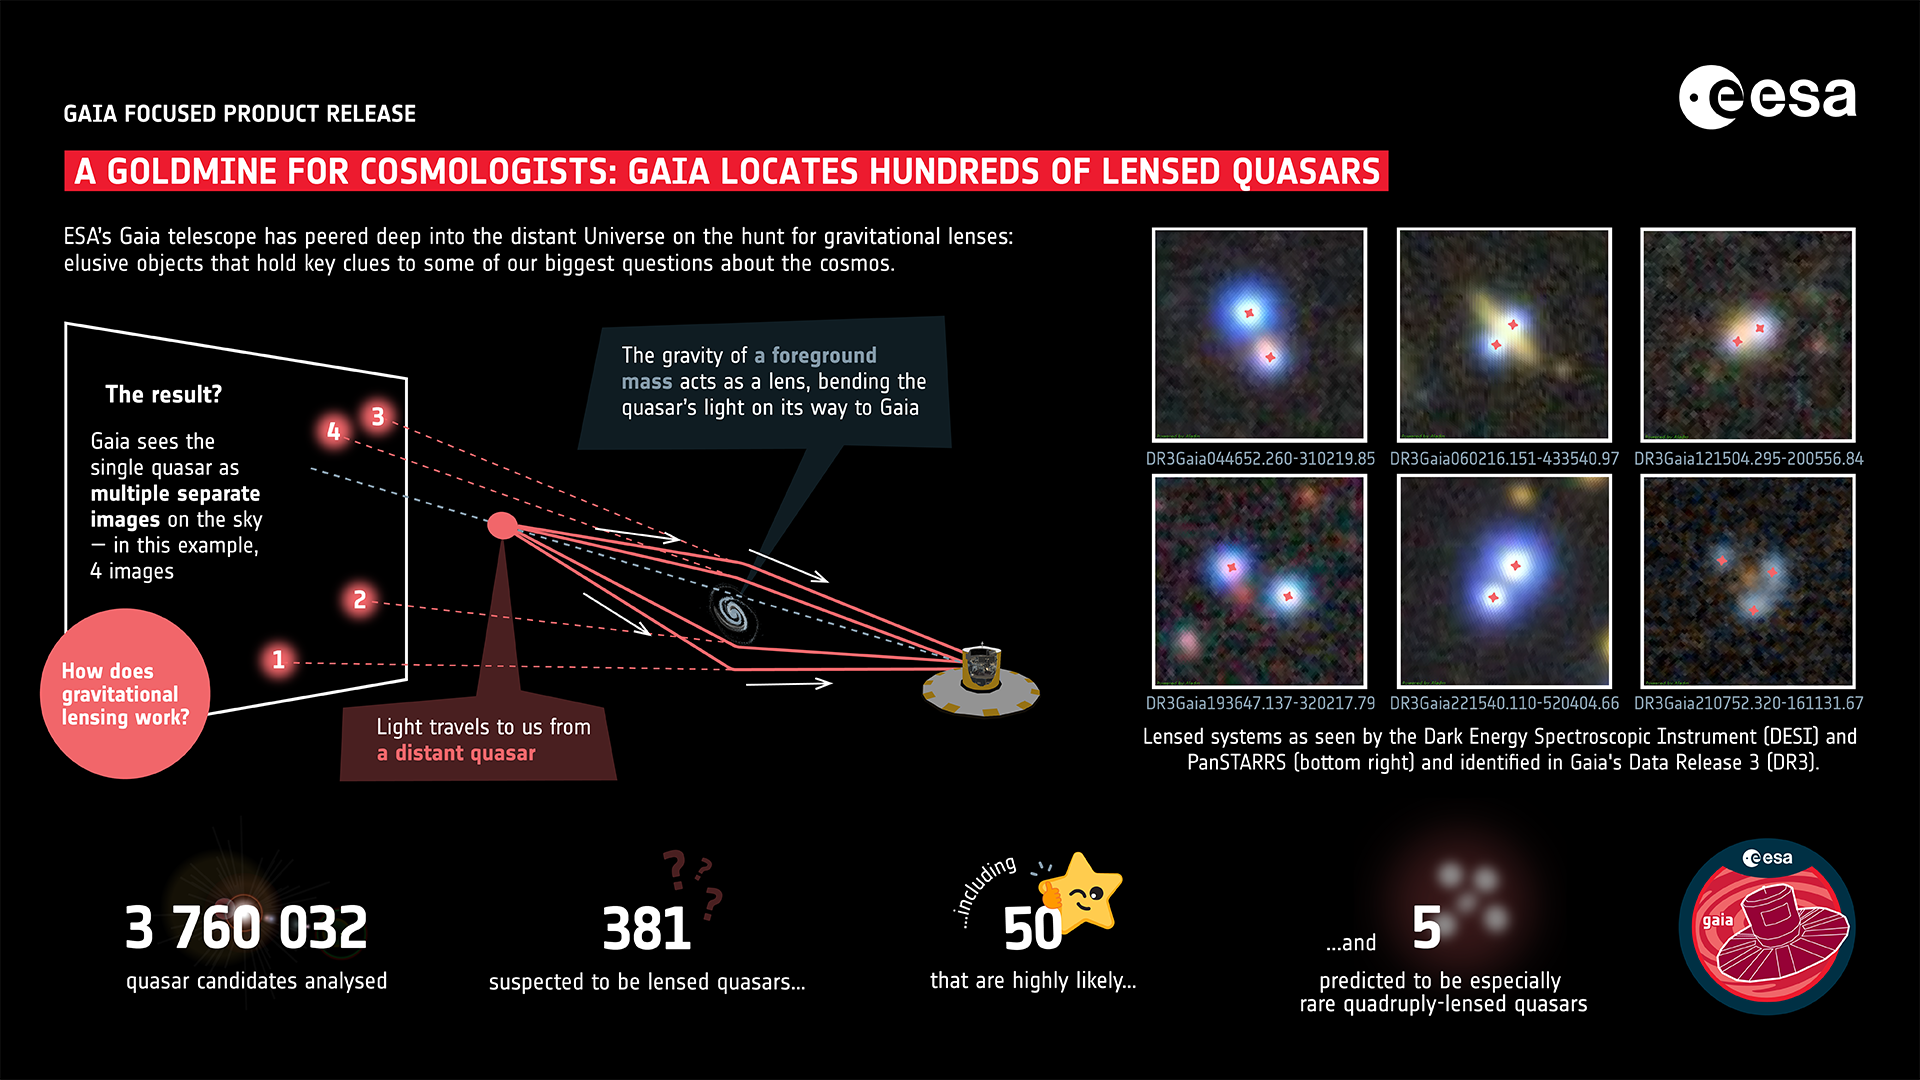 Gaia_locates_hundreds_of_lensed_quasar_candidates_in_new_data_release.png